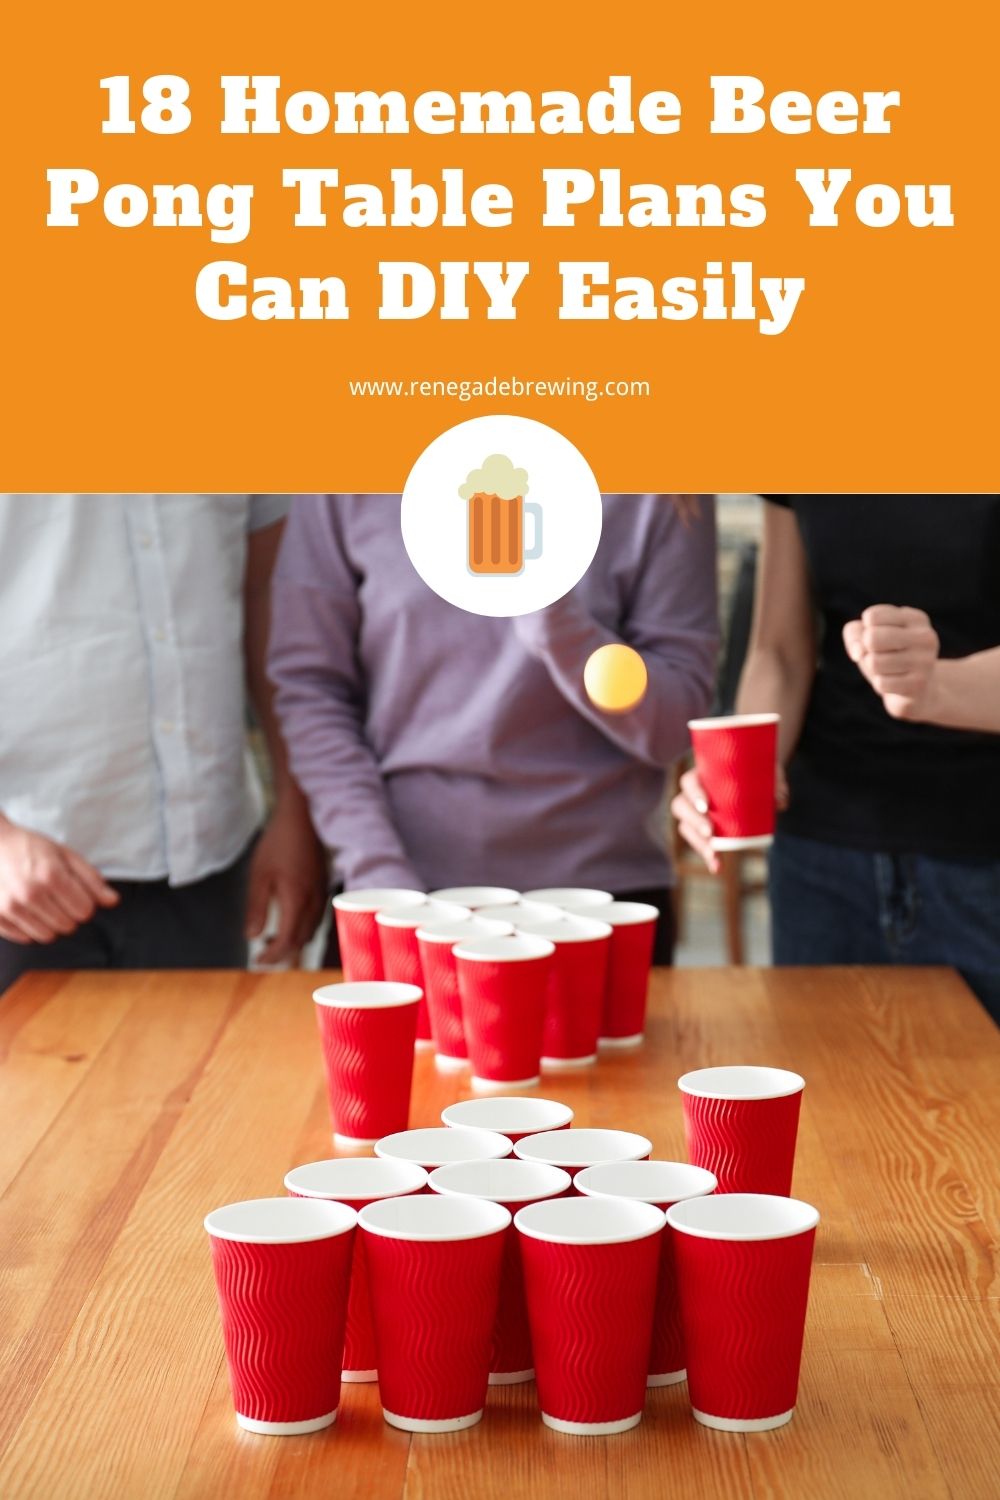 18 Homemade Beer Pong Table Plans You Can DIY Easily 2